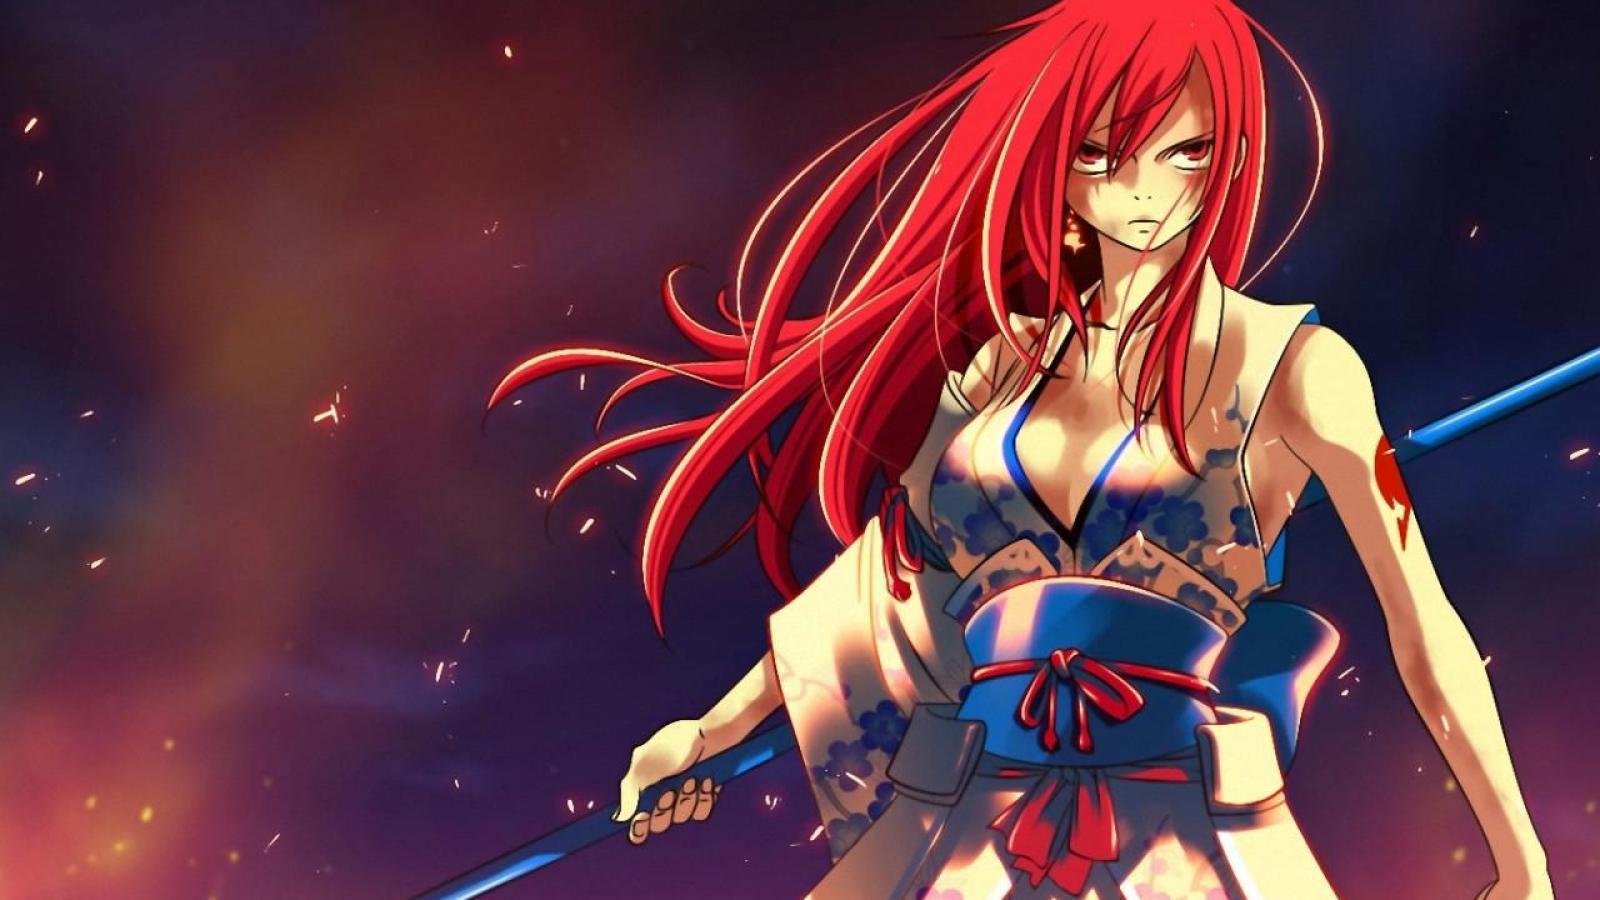 Erza scarlet   145113   High Quality and Resolution Wallpapers on